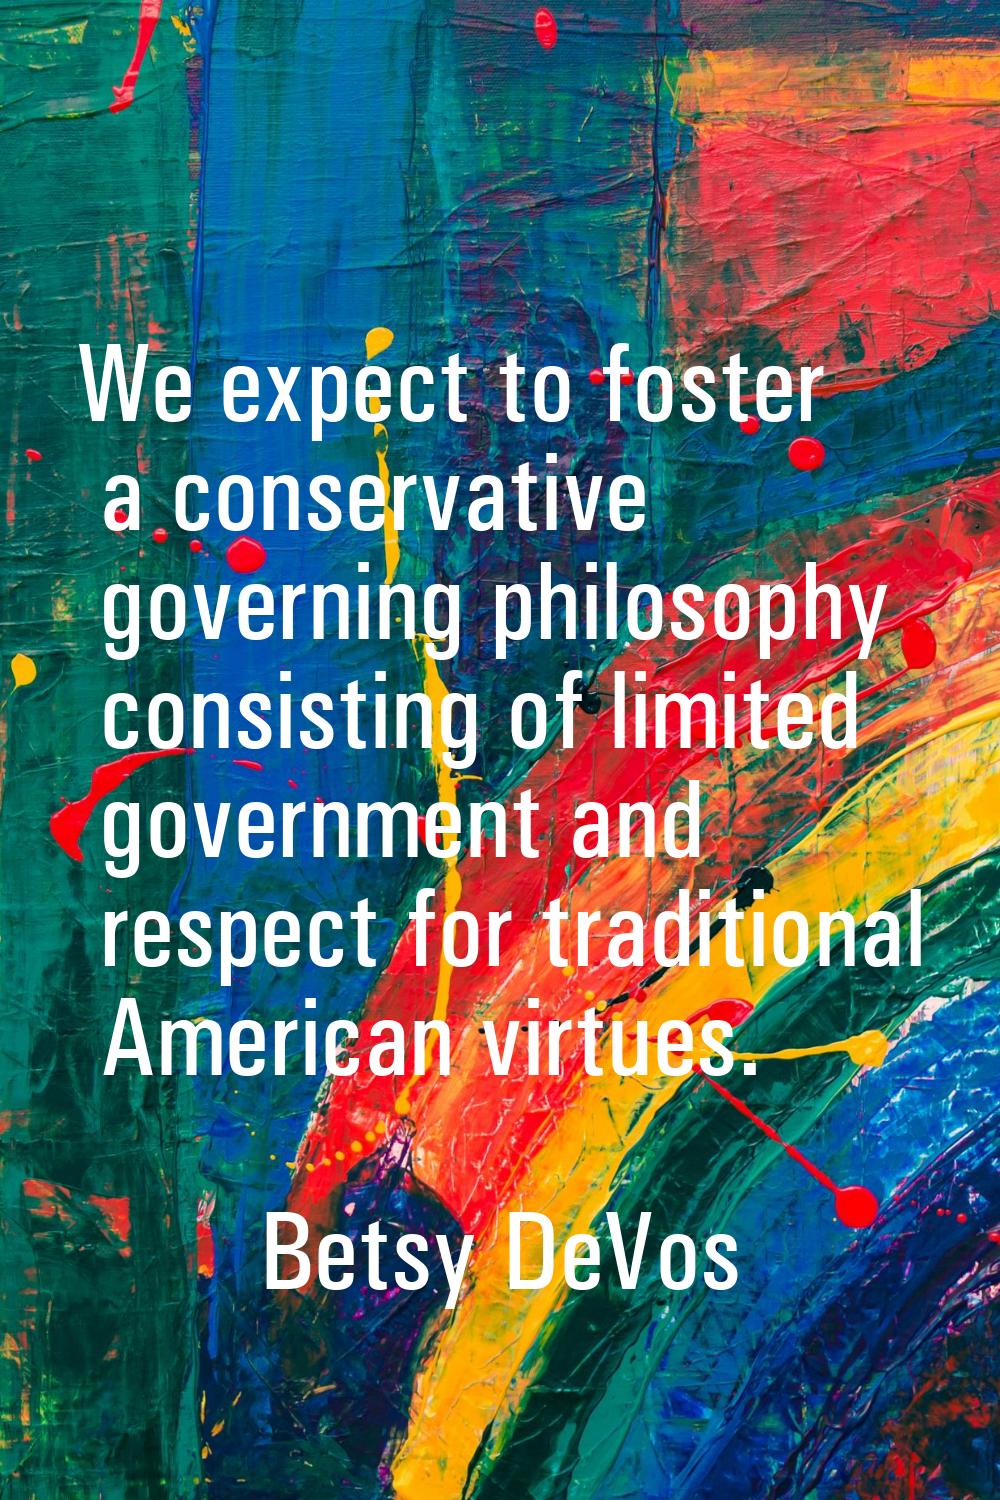 We expect to foster a conservative governing philosophy consisting of limited government and respec